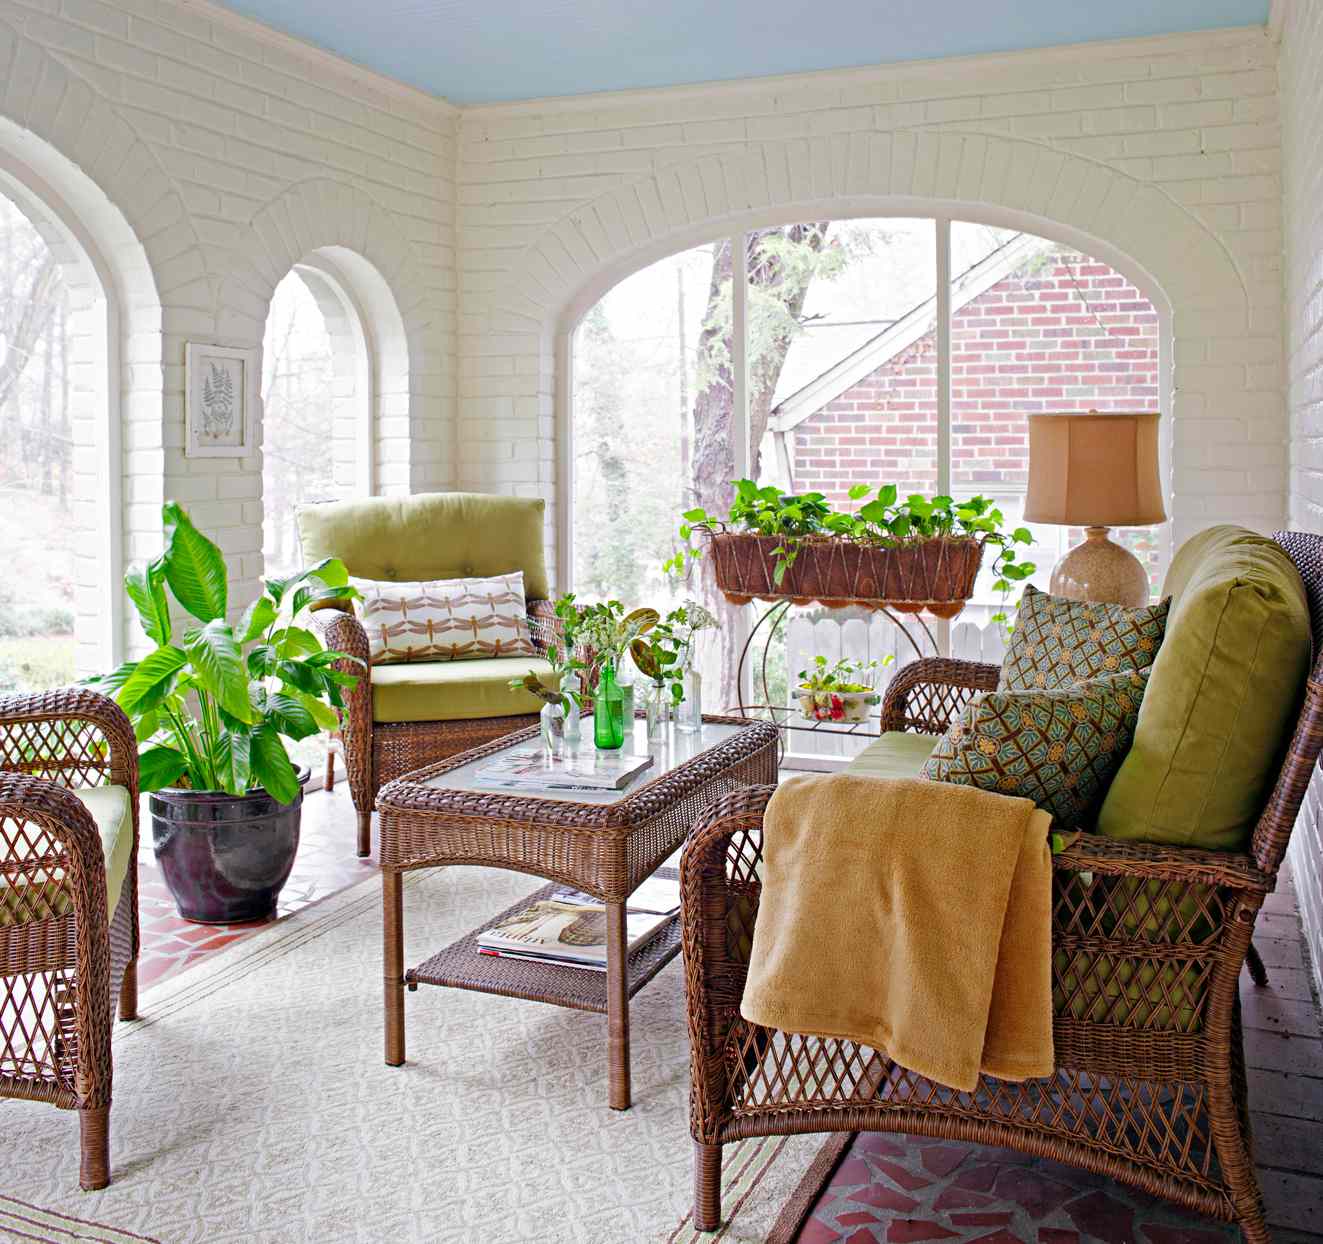 white painted brick porch with wicker furniture